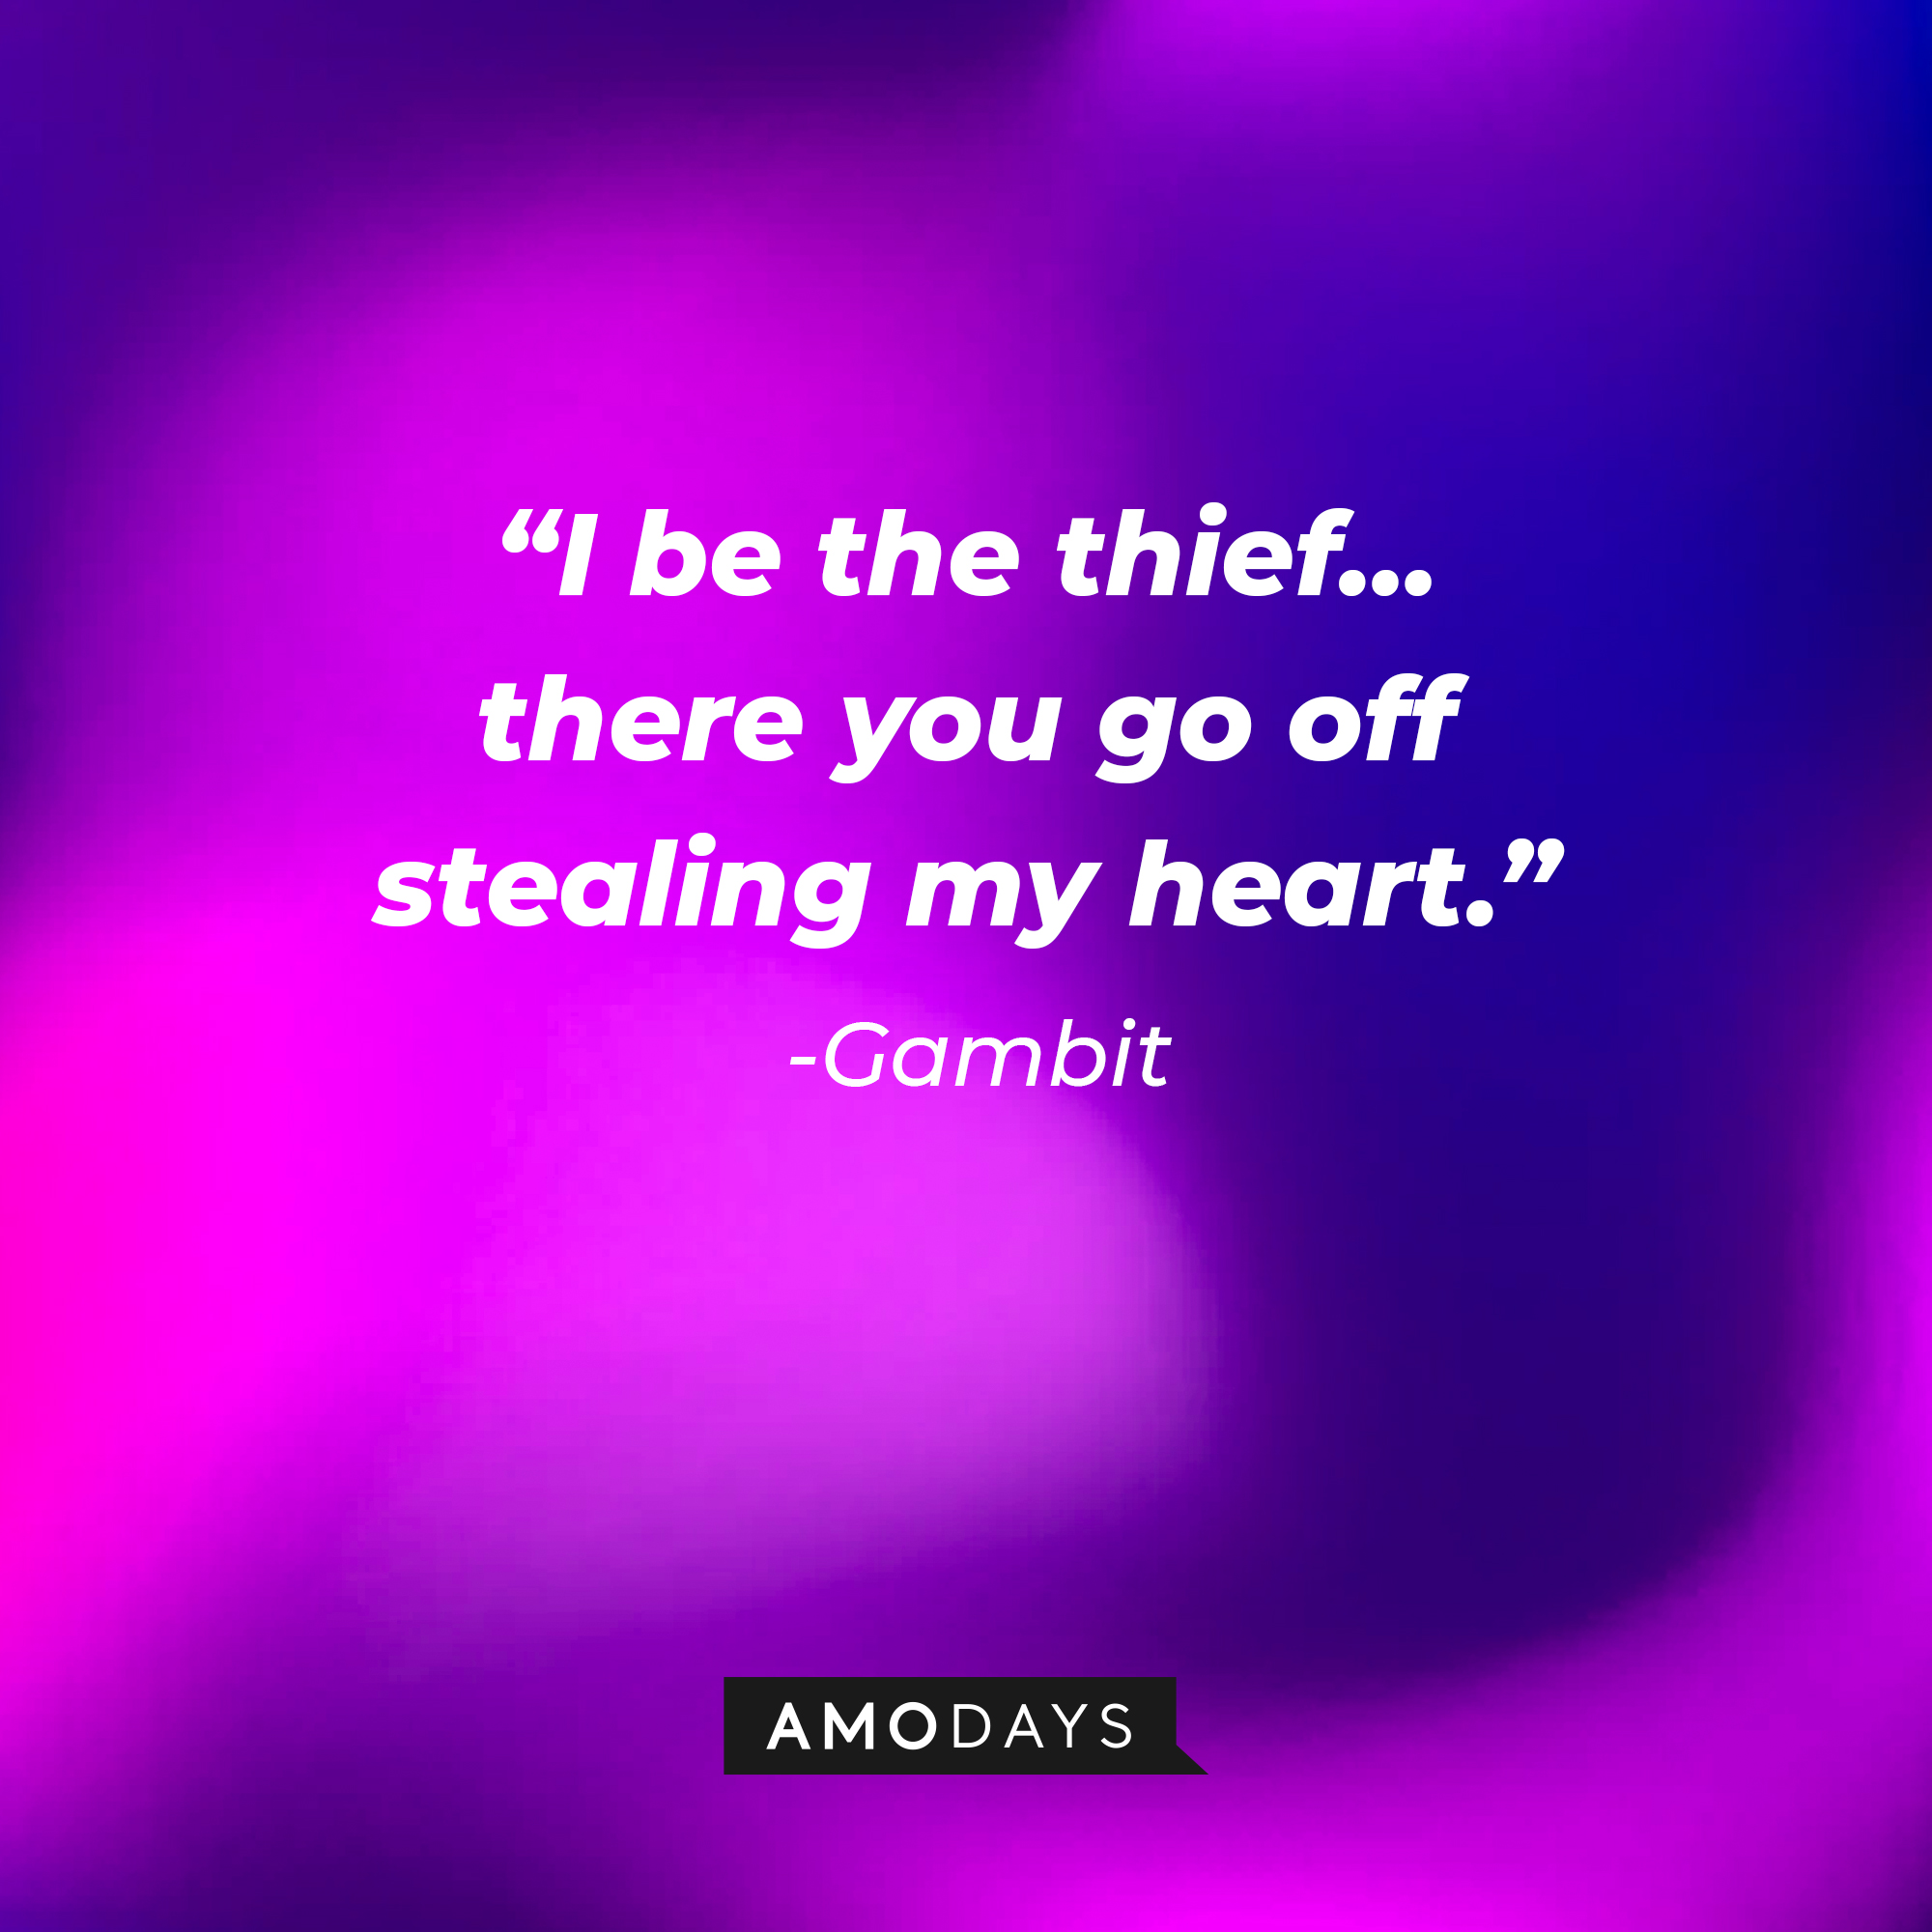 Gambit’s quote: “I be the thief…there you go off stealing my heart." | Source: AmoDays